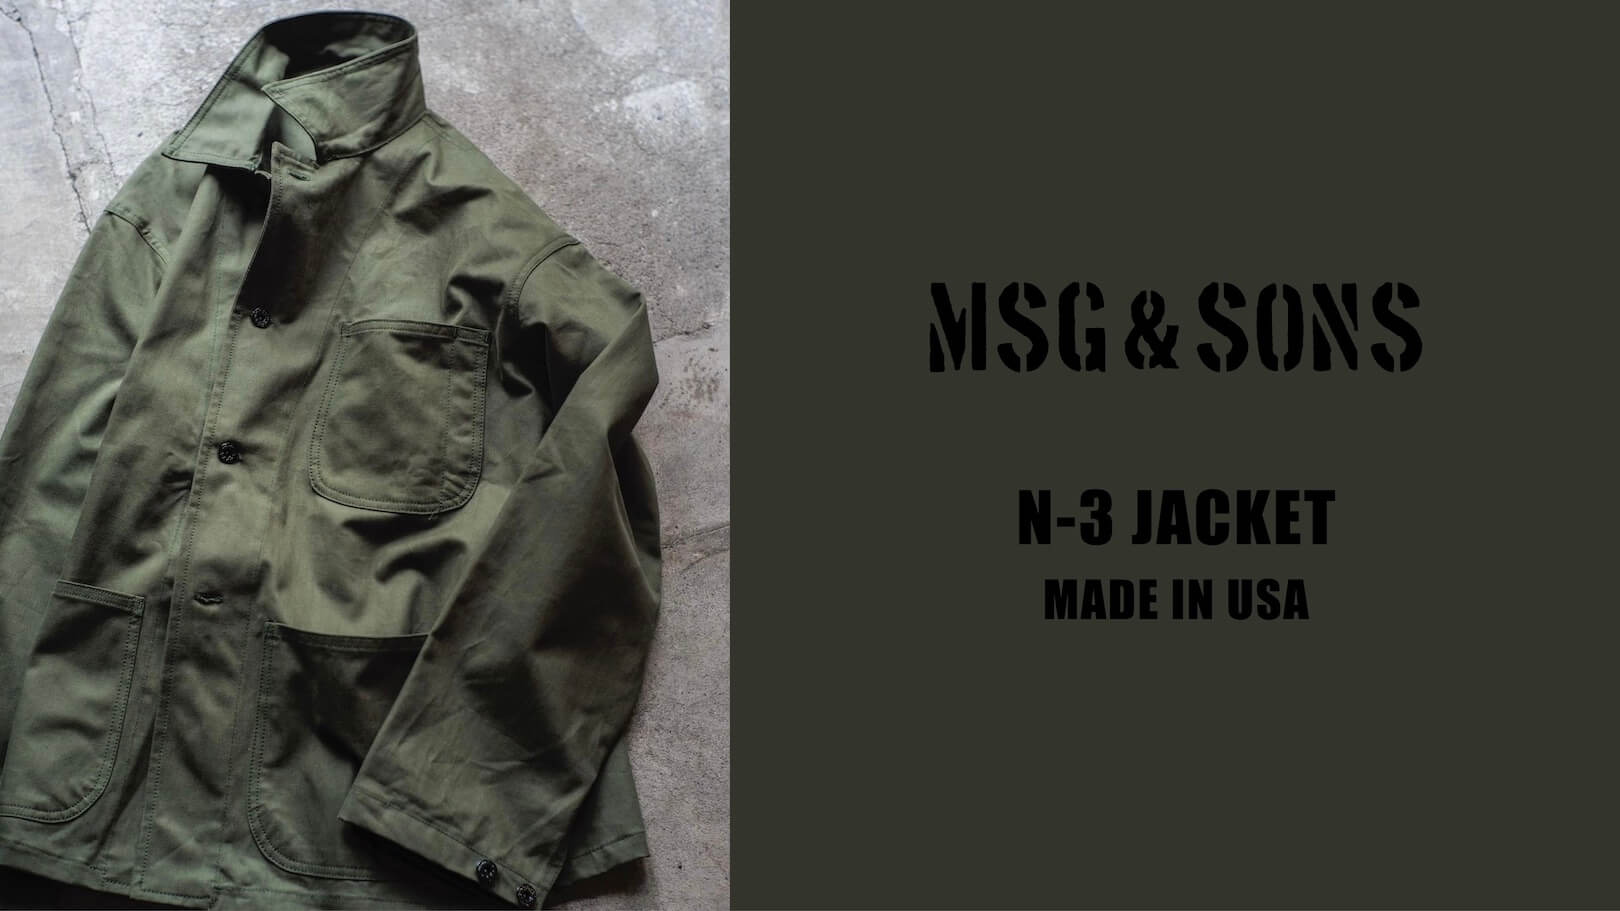 MSG & SONS N-3 JACKET – MADE IN USA